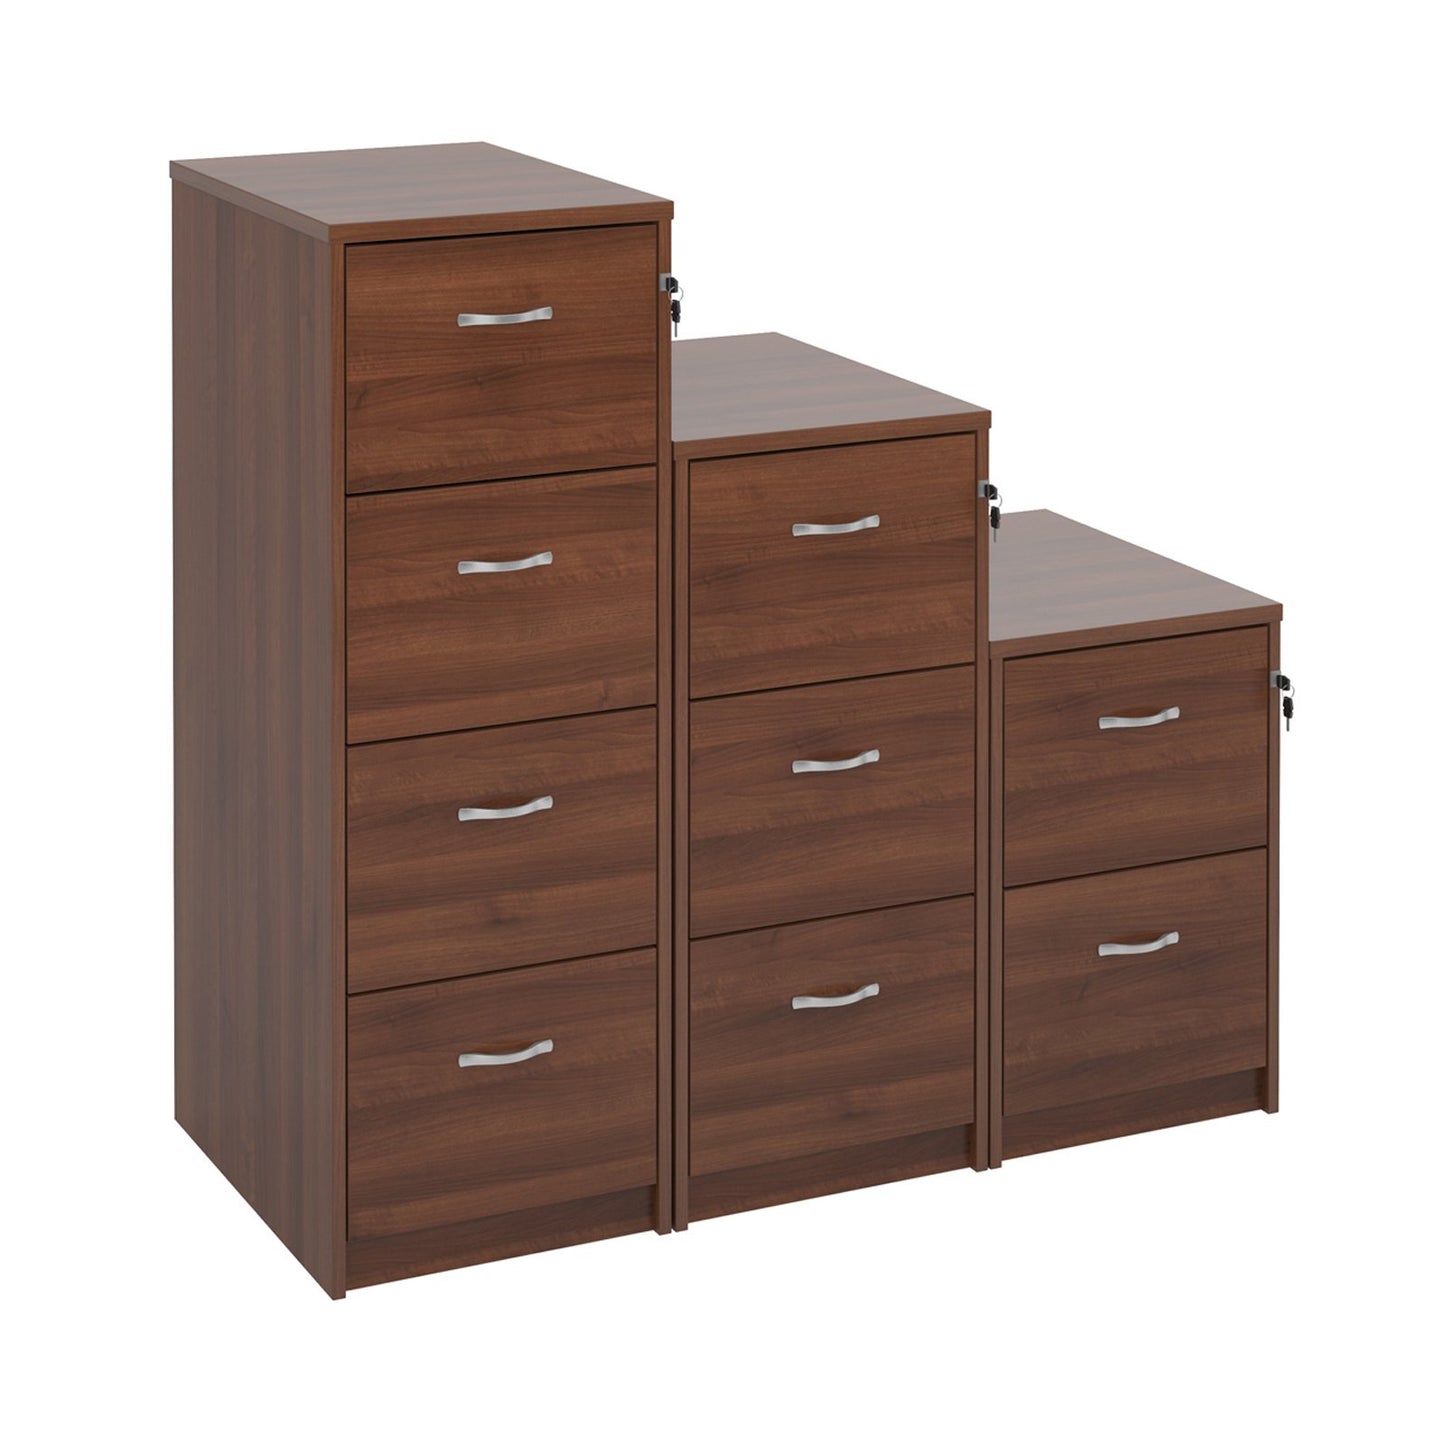 Wooden Filing Cabinet With Silver Handles - 4 Drawer - Walnut